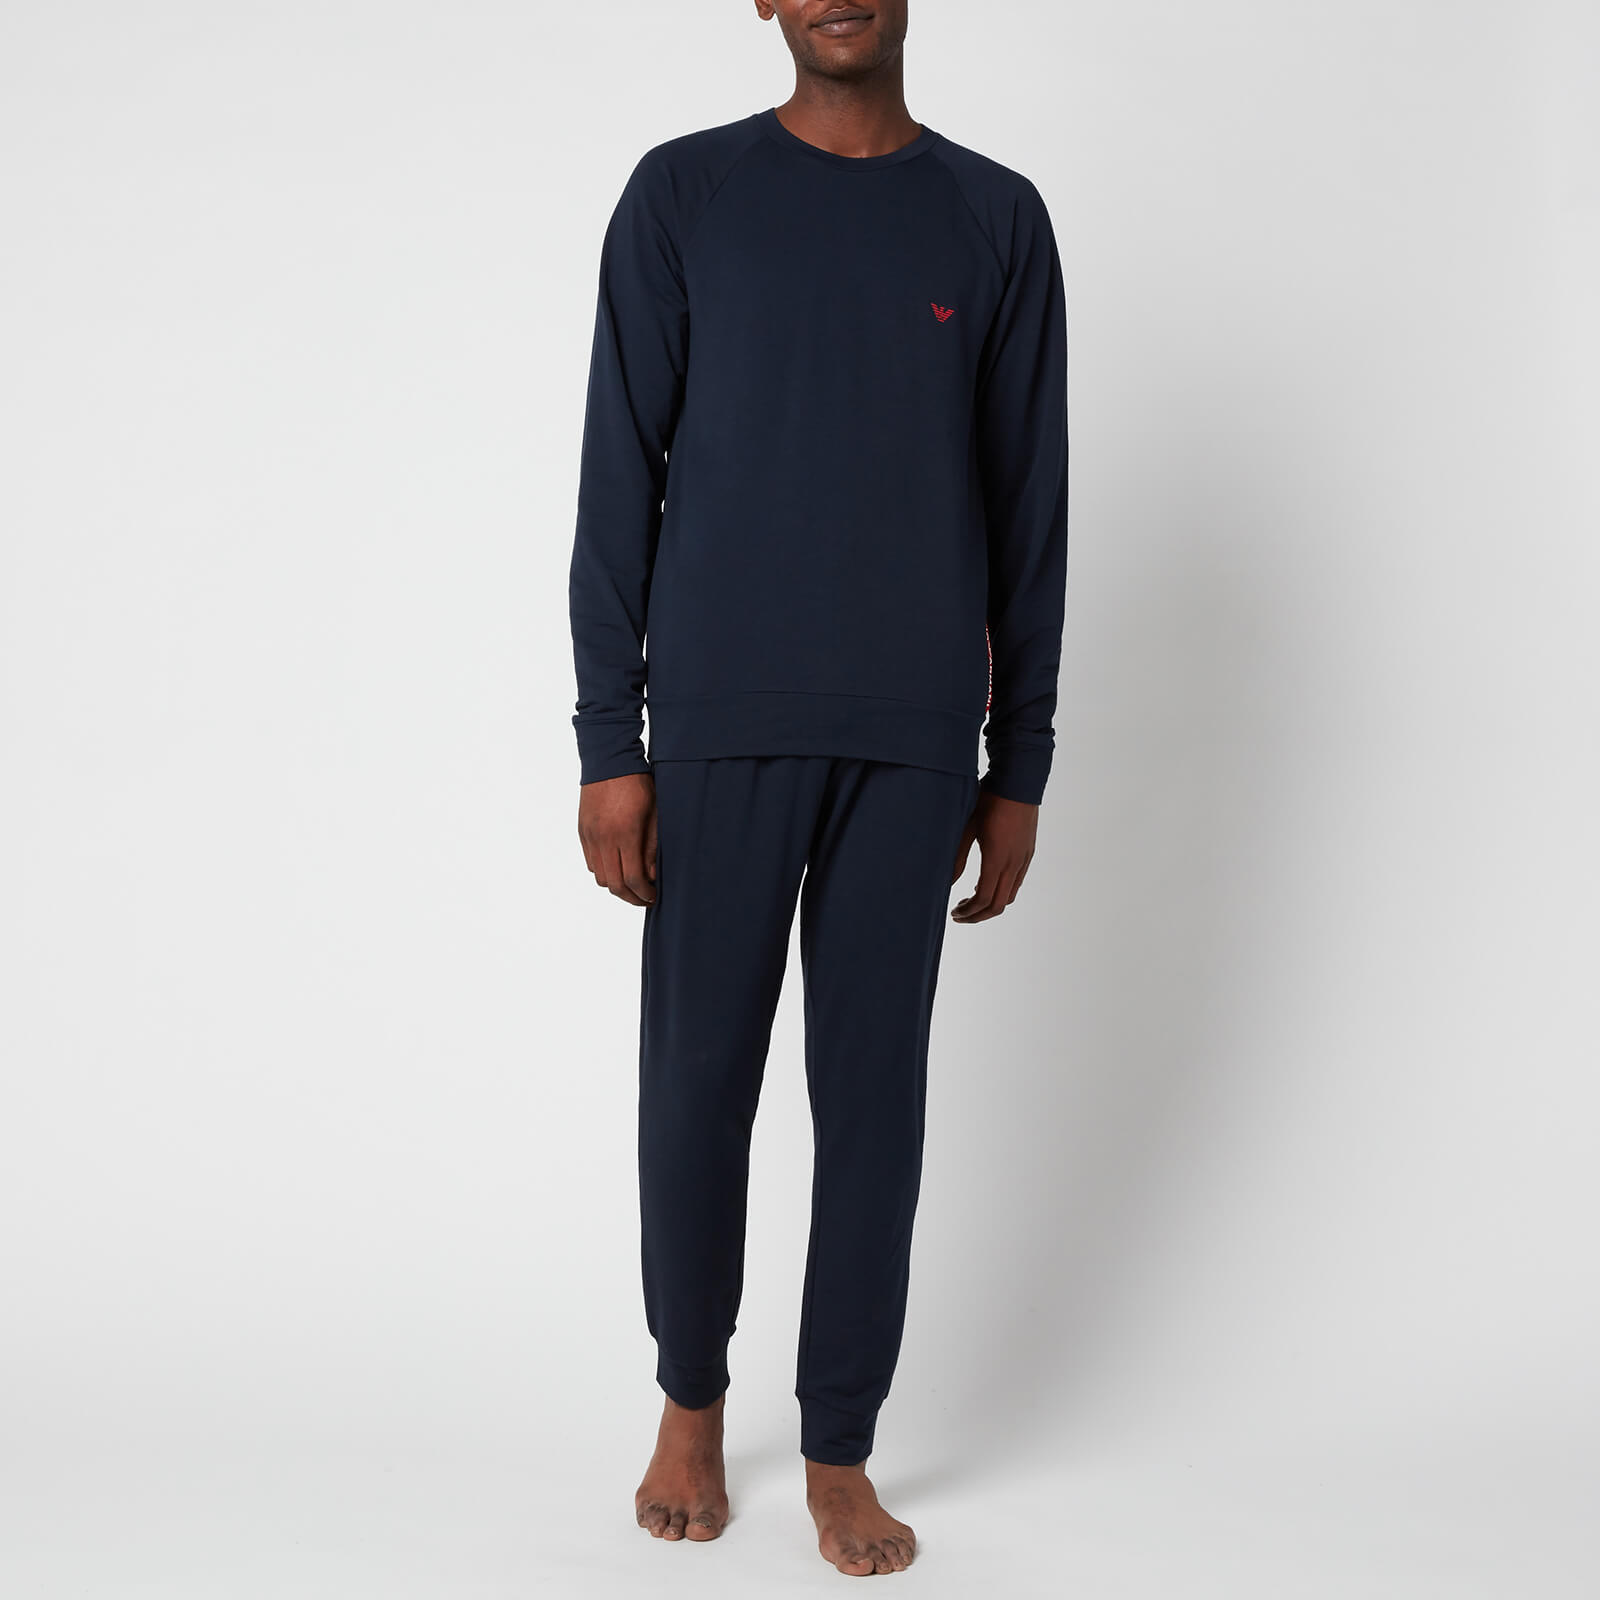 Emporio Armani Men's Stretch Terry Sweatshirt and Trousers Set - Blue - S